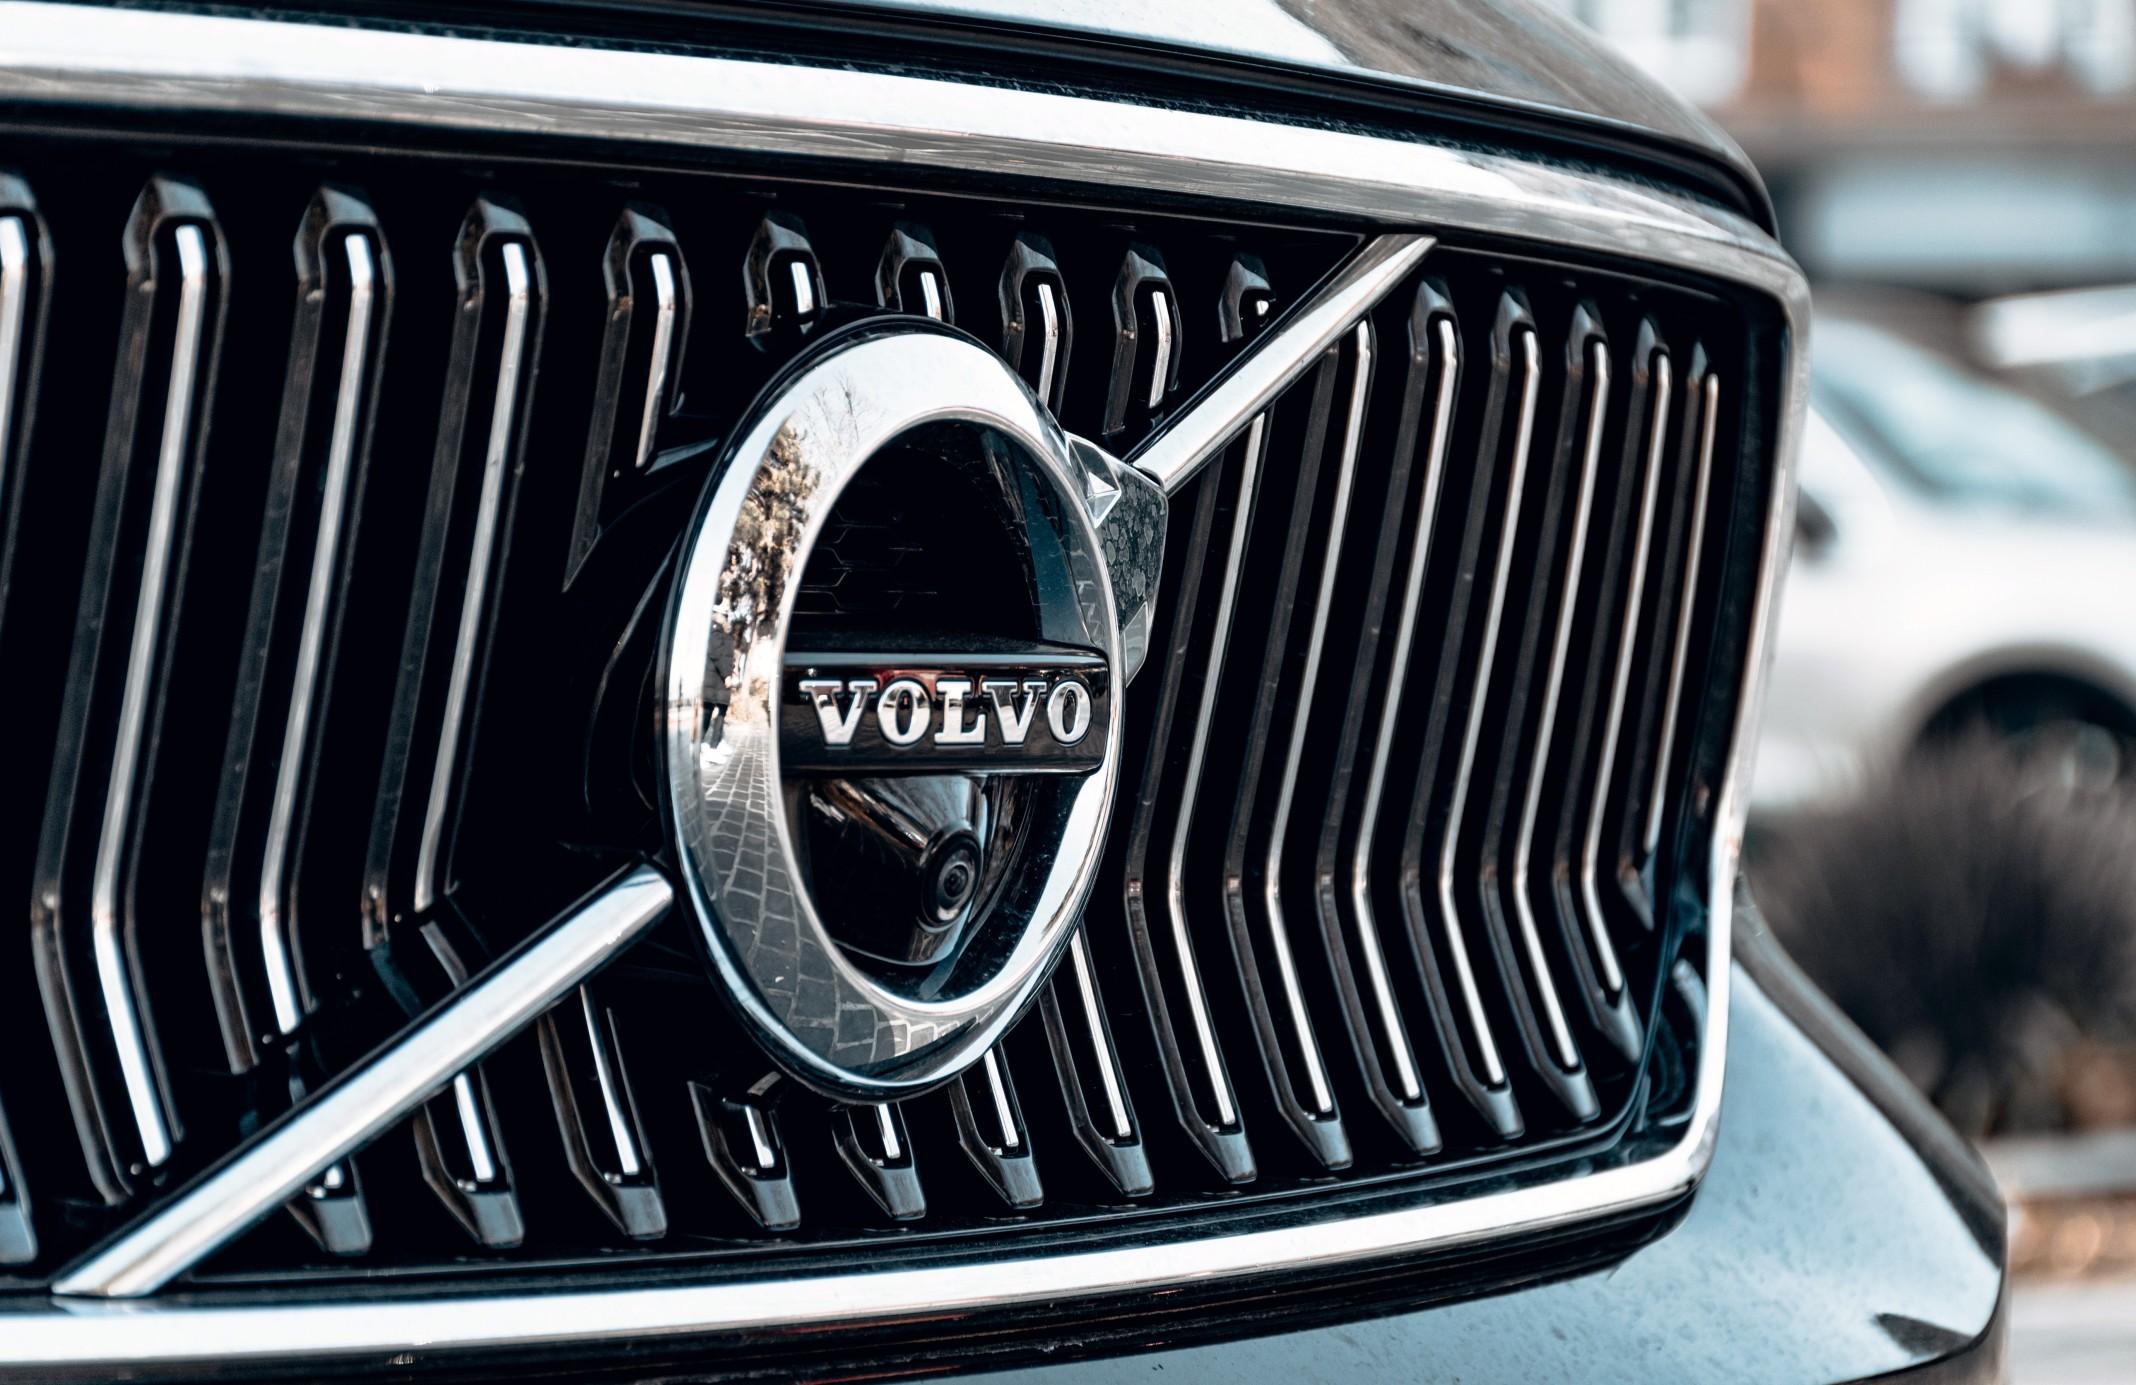 A Volvo badge on the front grille of a car.